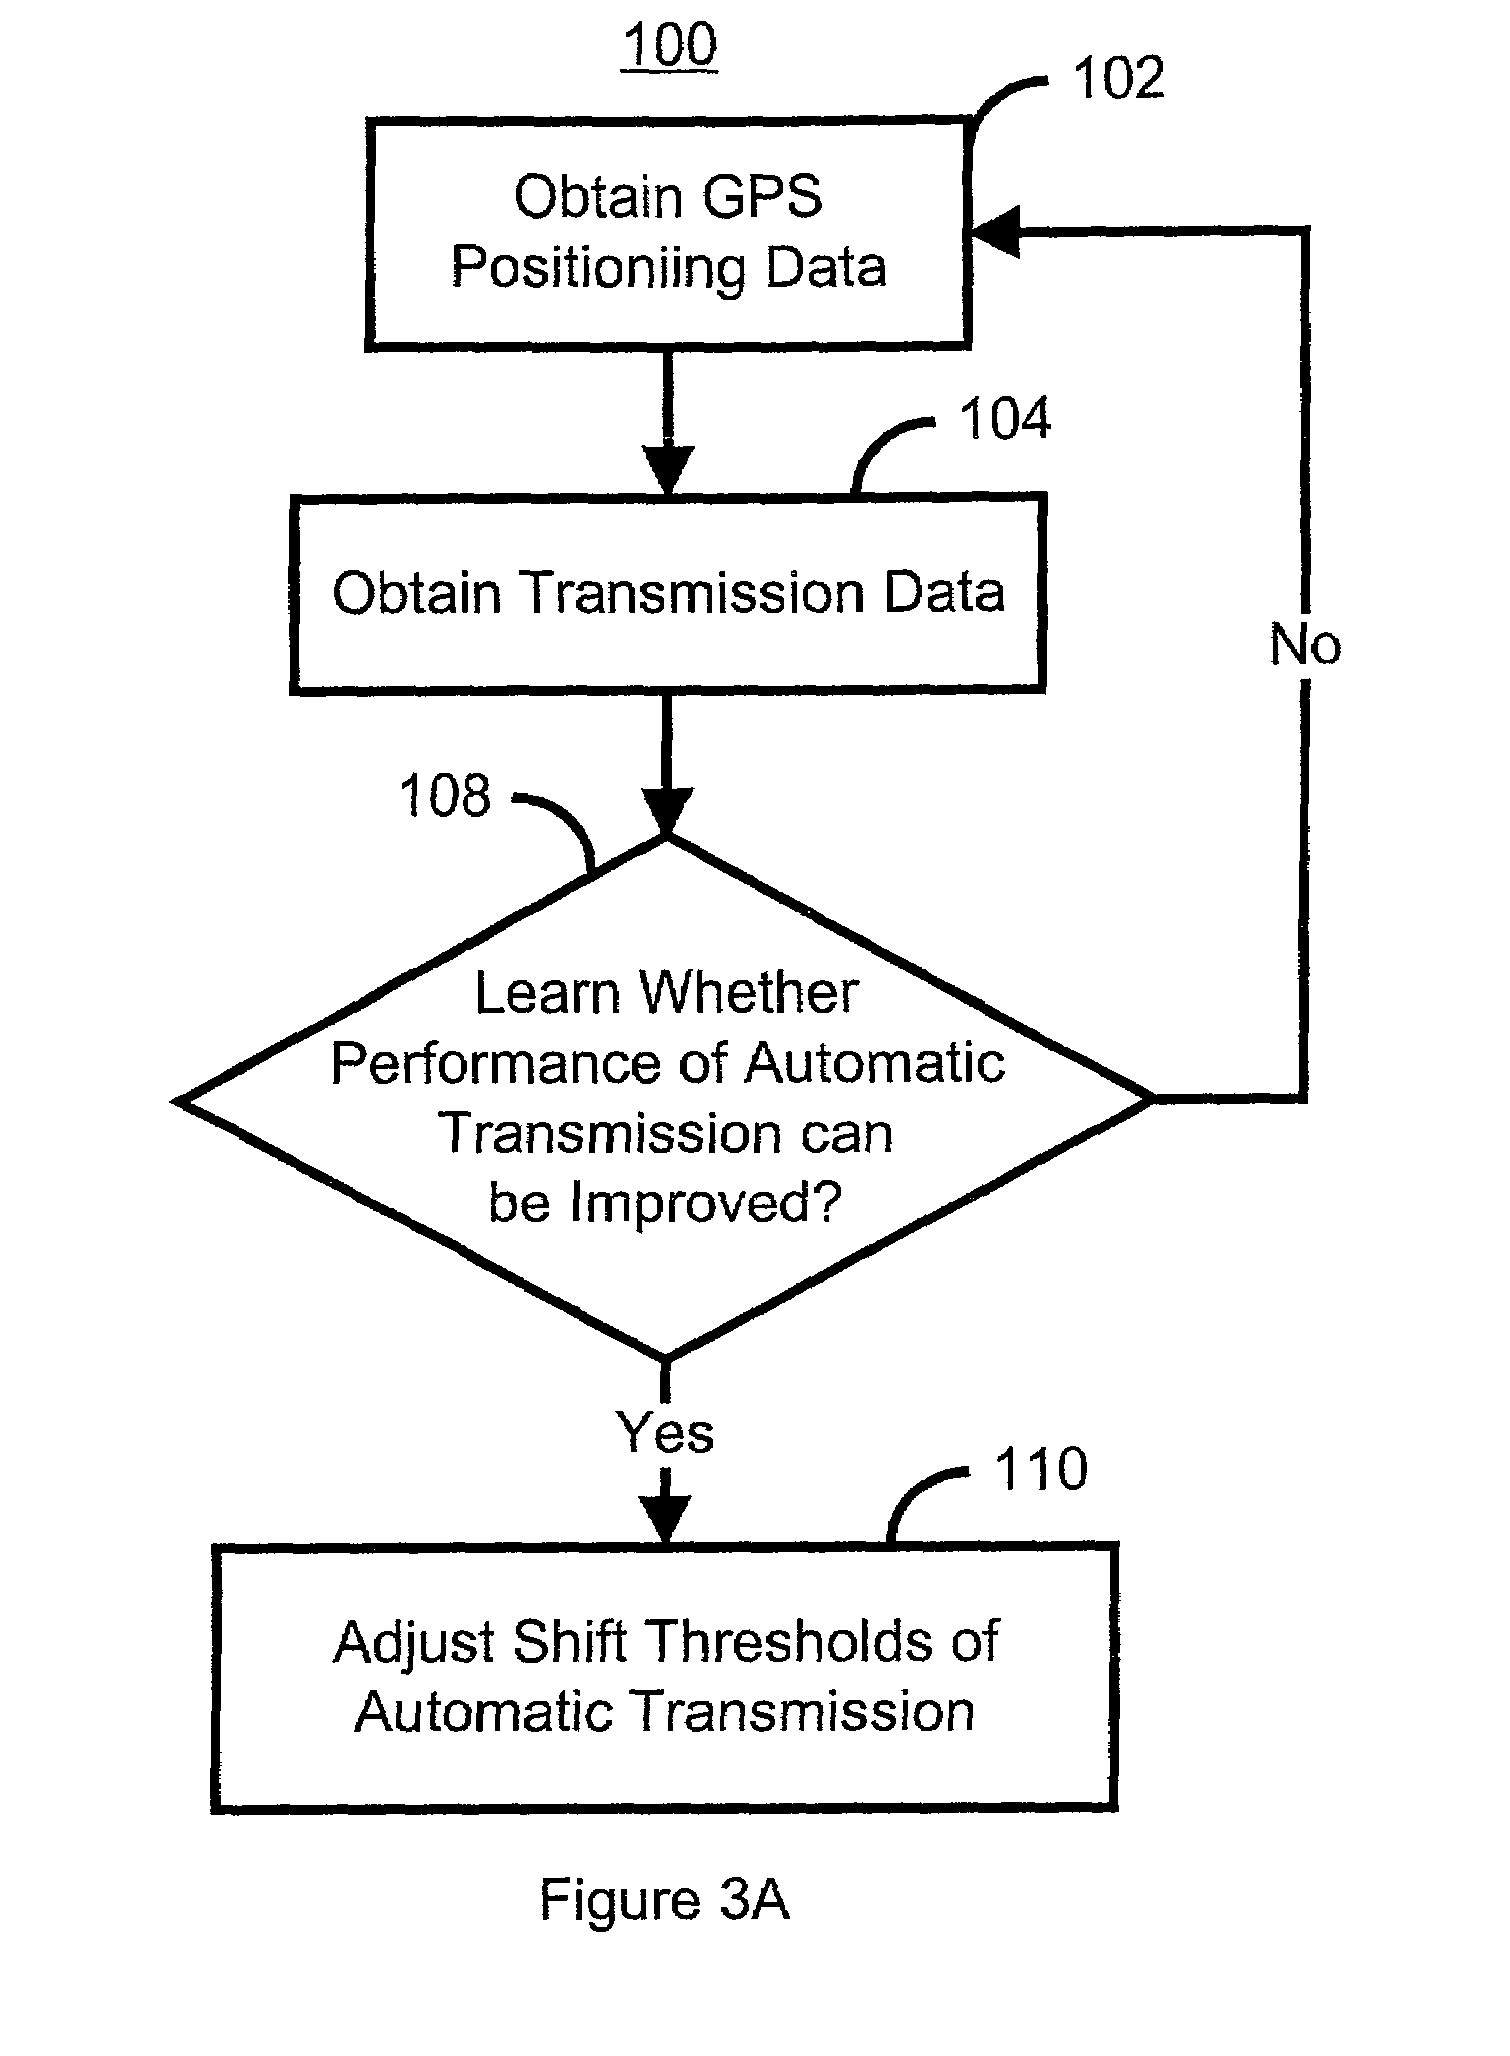 Method and system for controlling an automatic transmission using a GPS assist having a learn mode